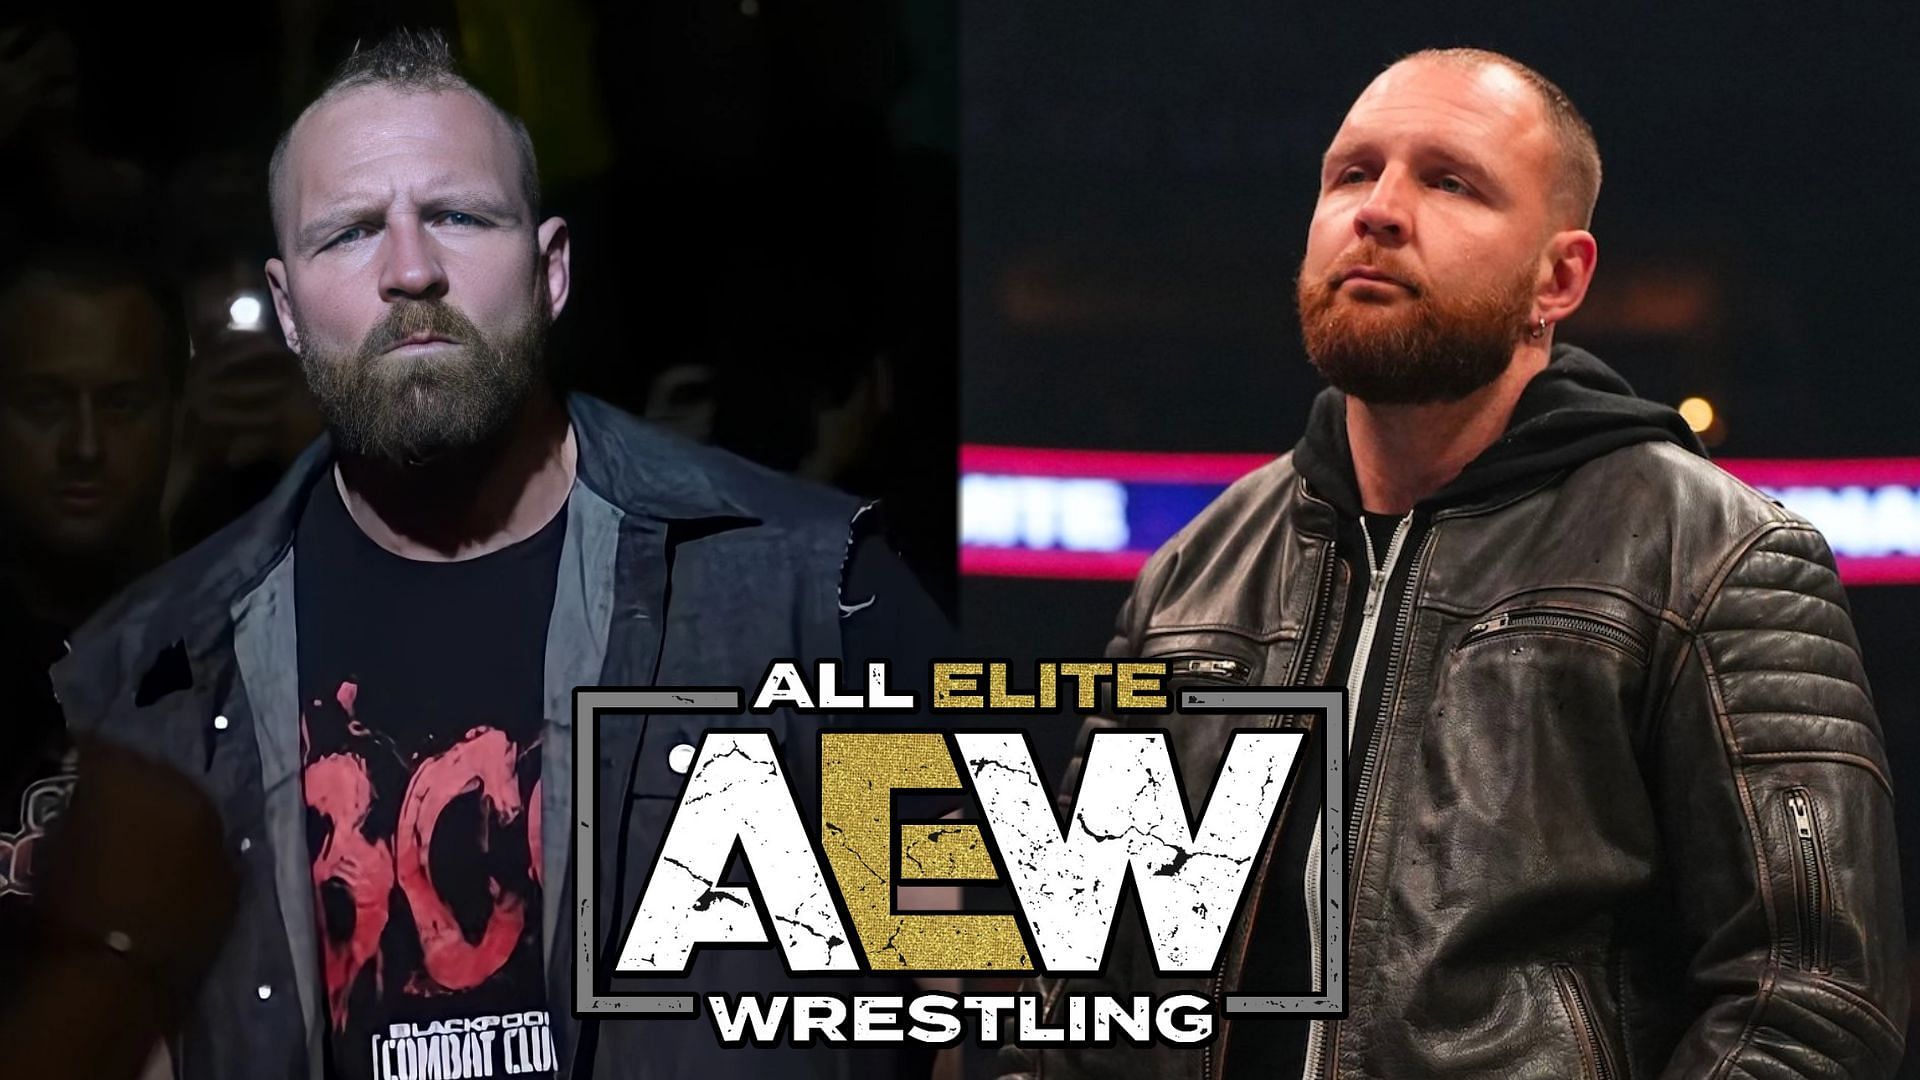 Jon Moxley is one of the most recognizable AEW stars.